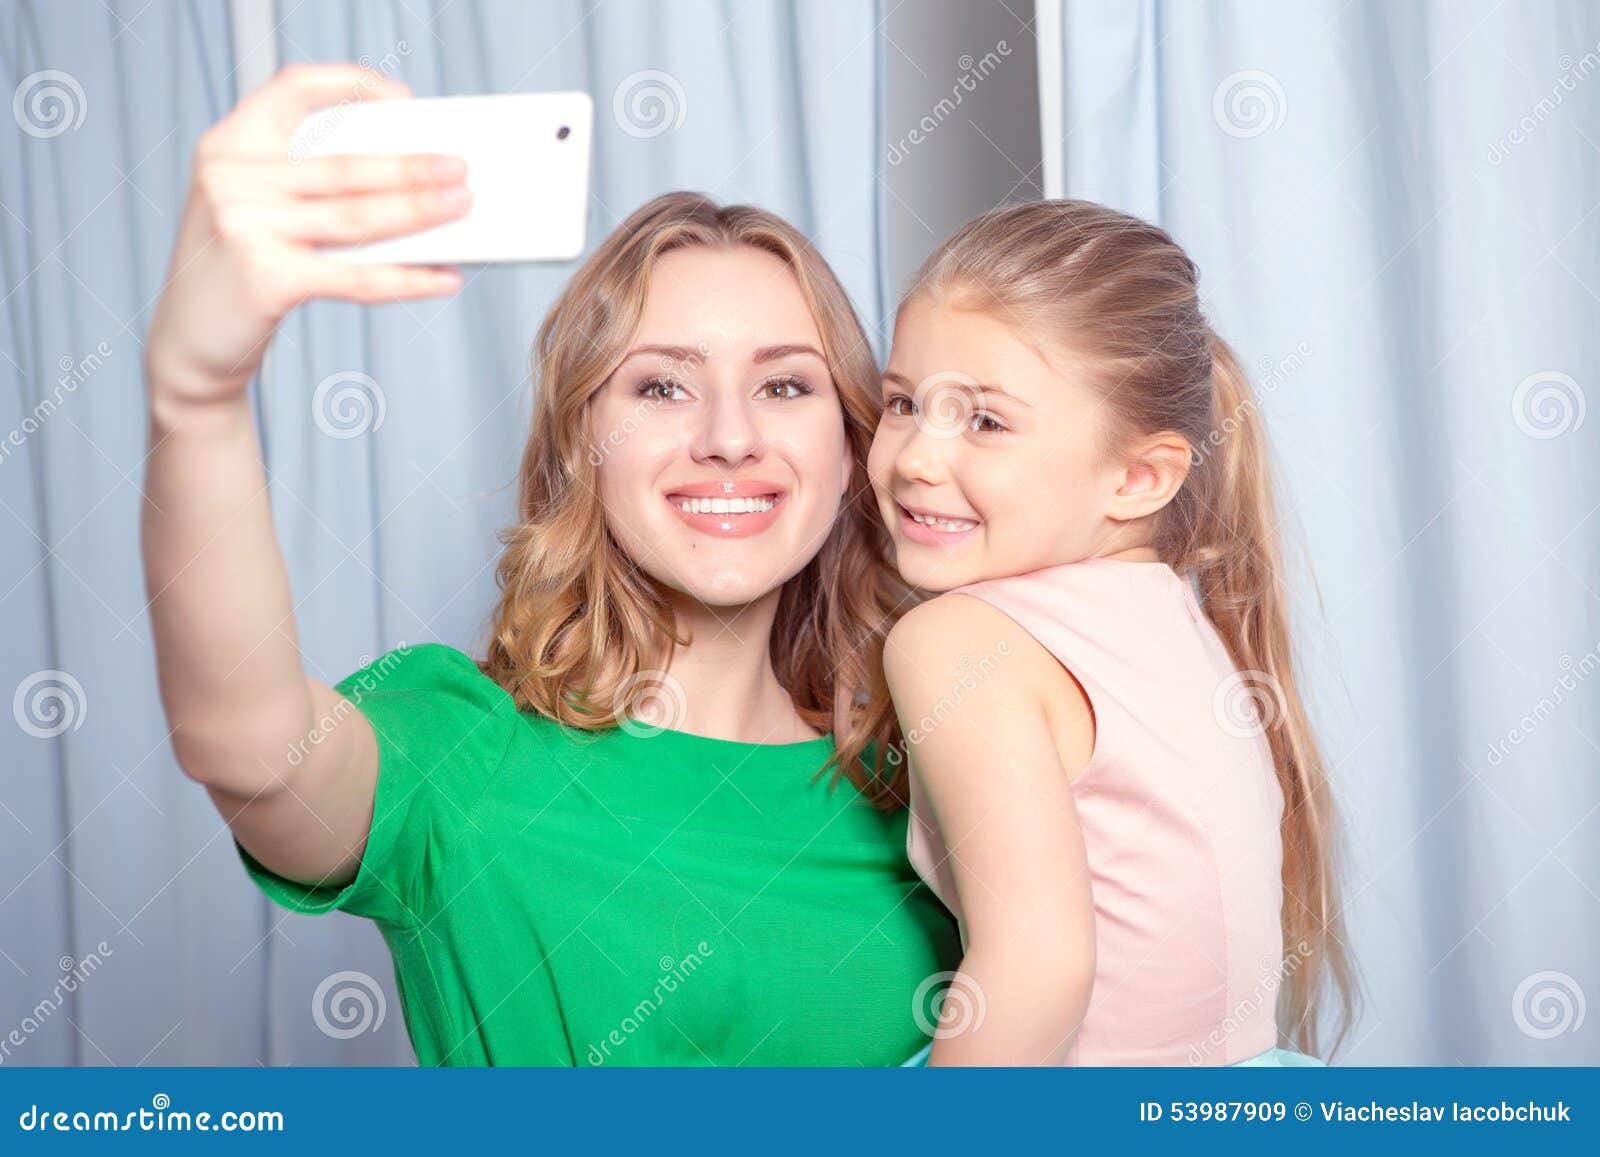 Young Woman Making Selfie in a Fitting Room Stock Image - Image of ...